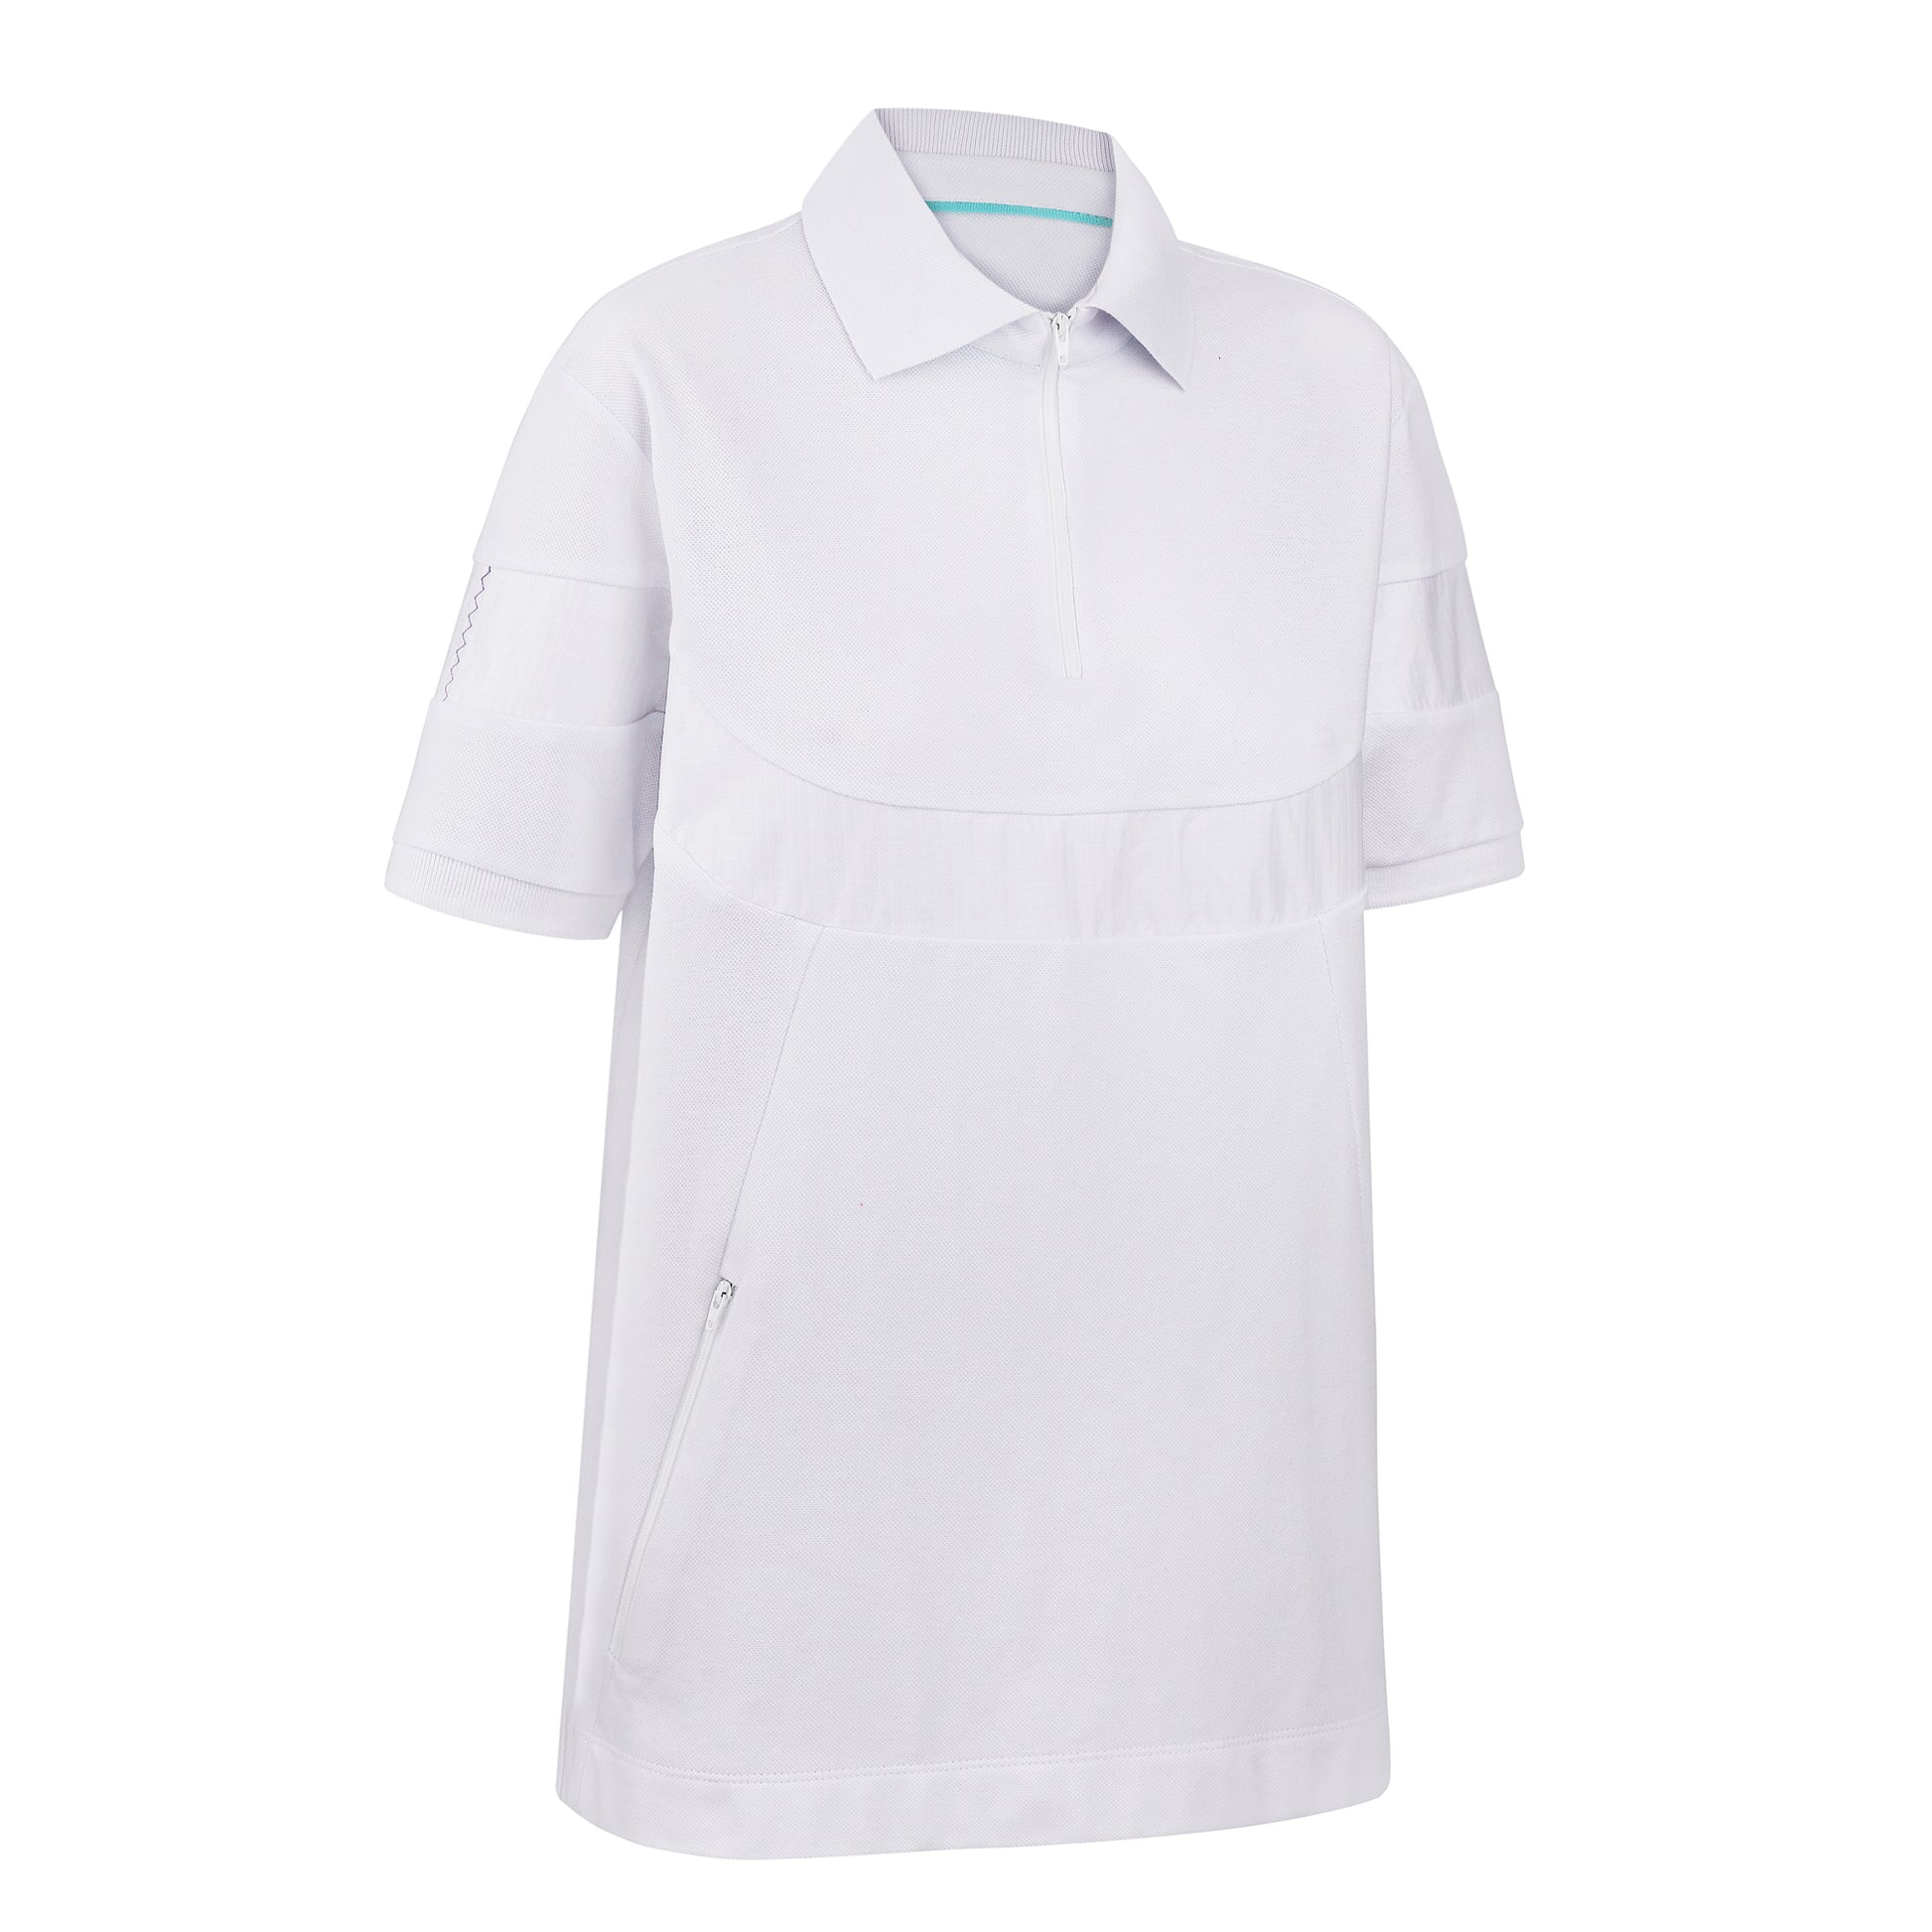 White polo shirt with pockets from REwind - Ukrainian clothes manufacturer brand